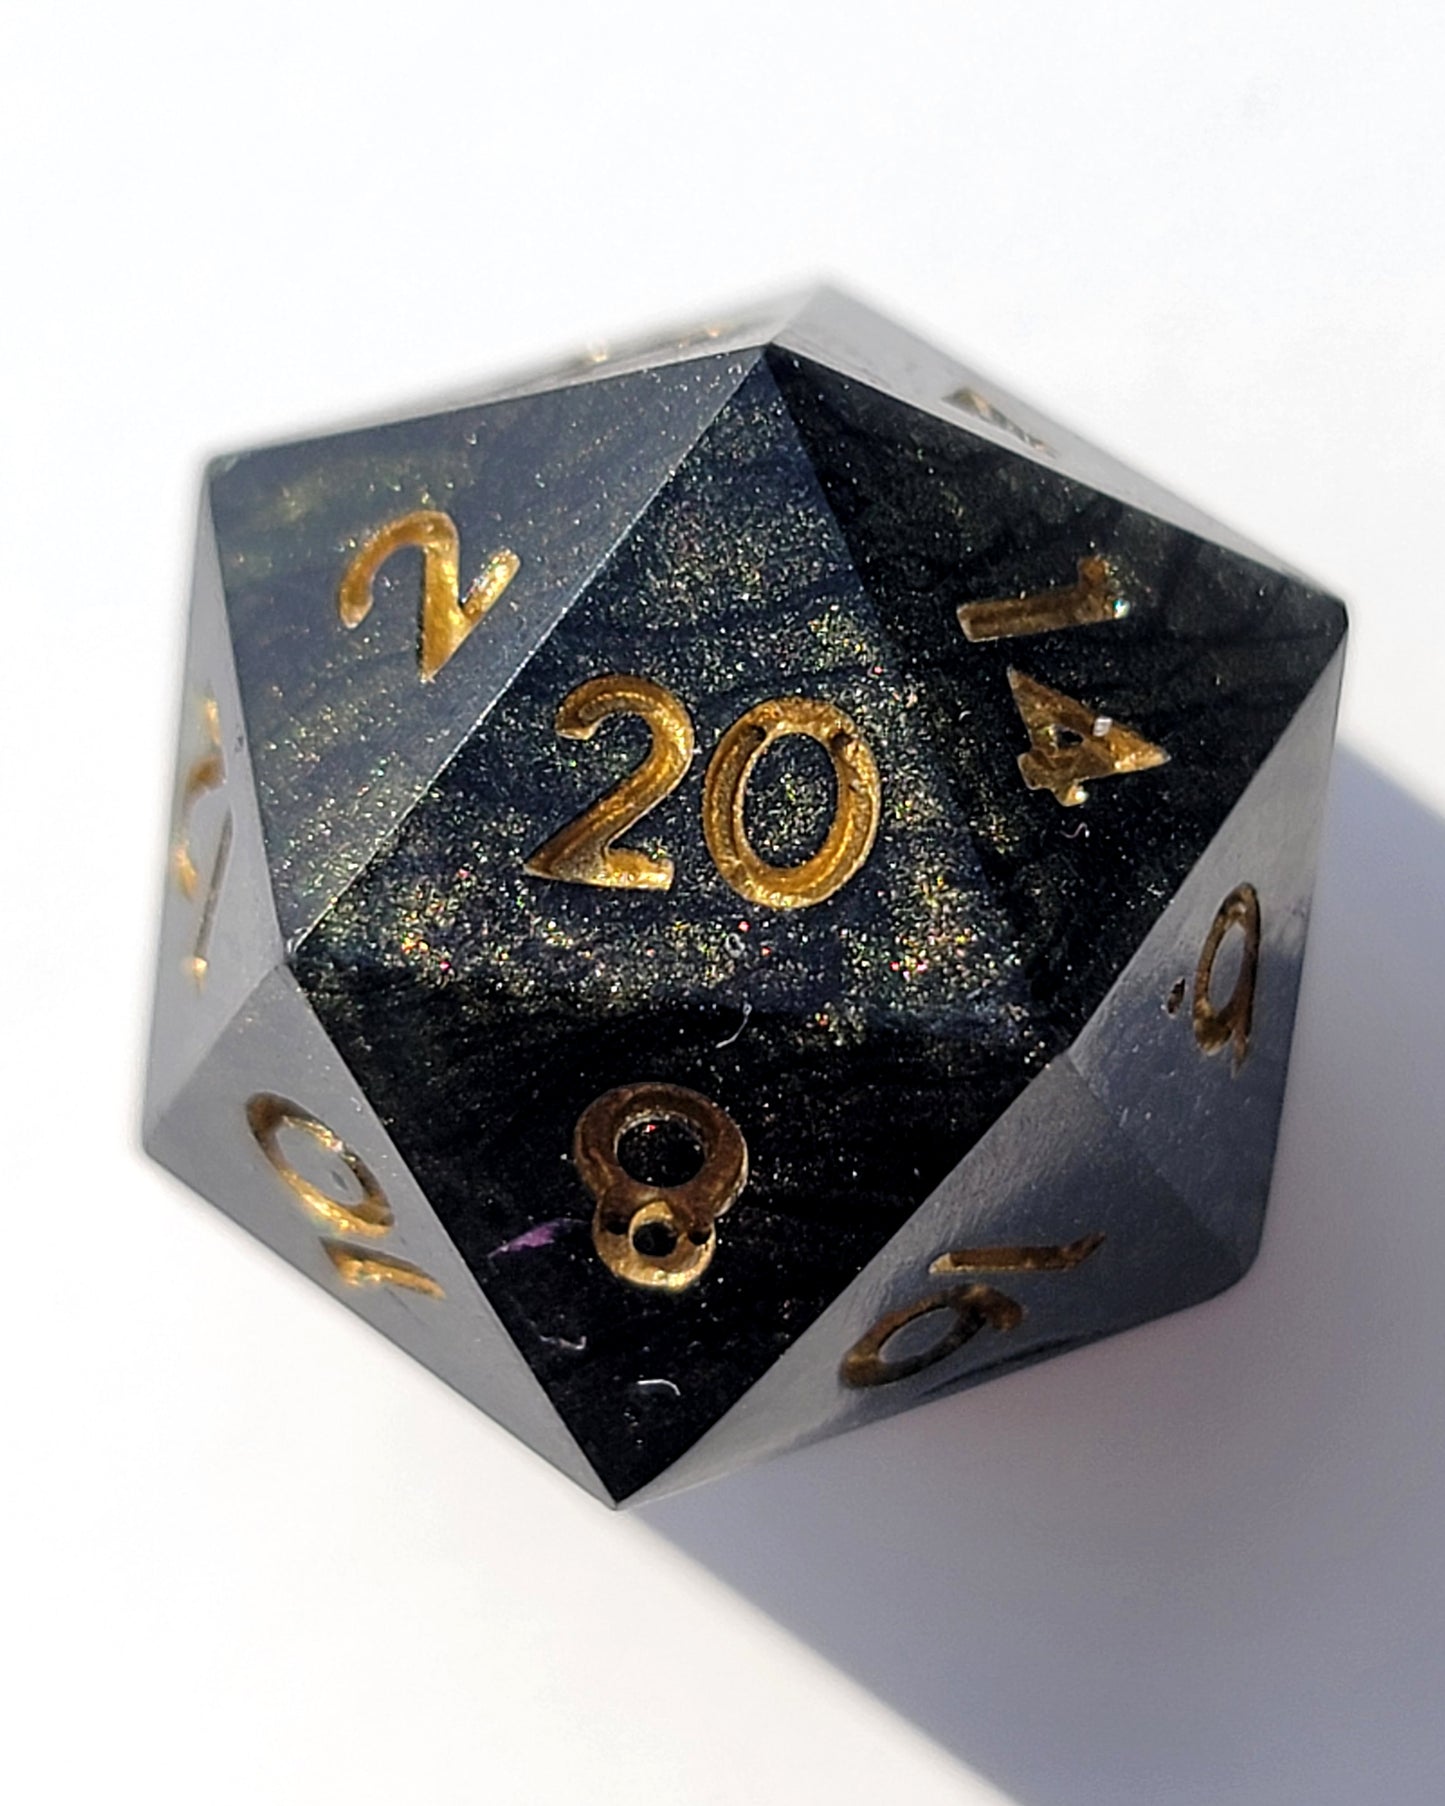 Nelka - Single D20 | Handcrafted D20 | Hand Made dungeons and dragons dice